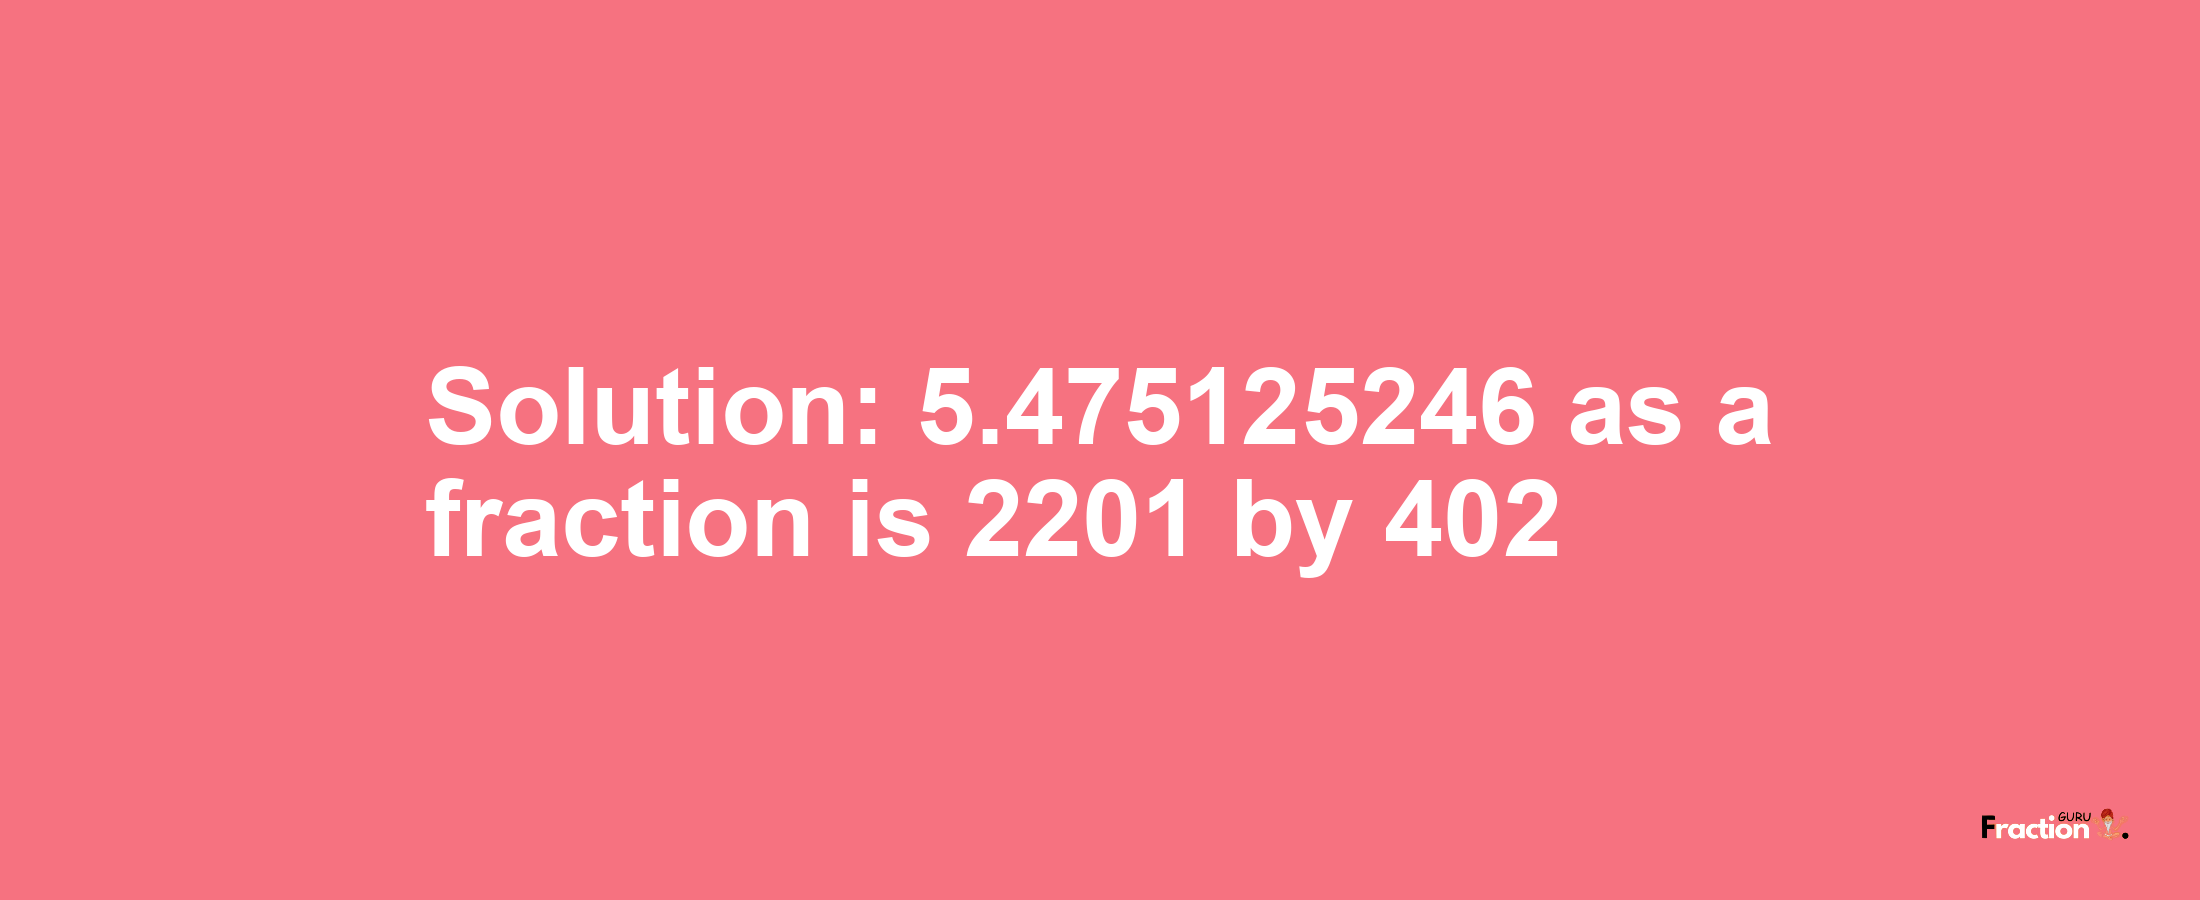 Solution:5.475125246 as a fraction is 2201/402